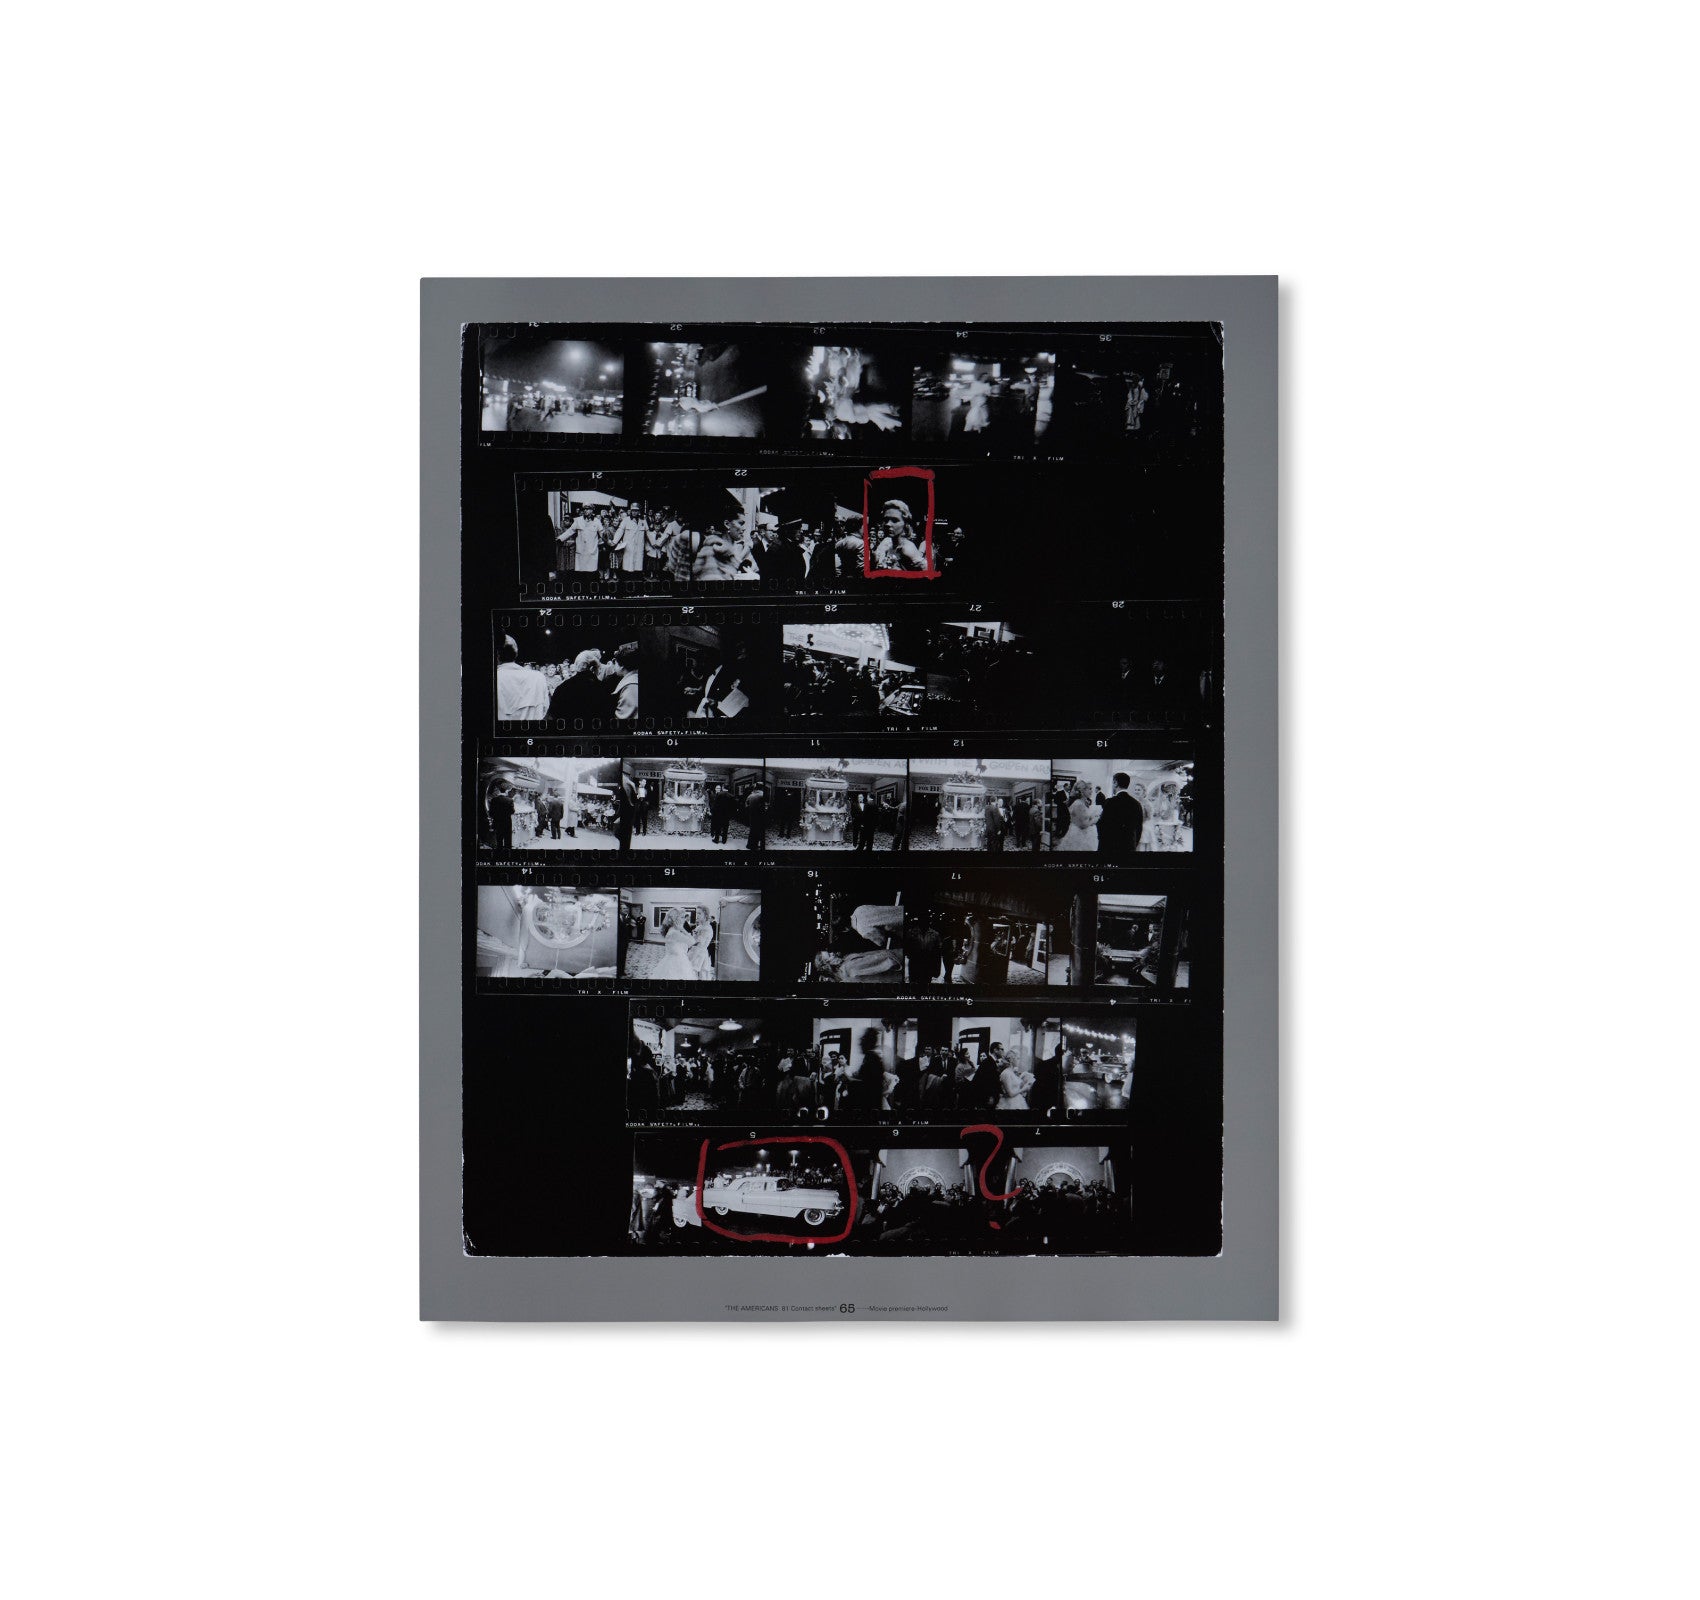 THE AMERICANS, 81 CONTACT SHEETS (FOLDING BOARD BOX) by Robert Frank